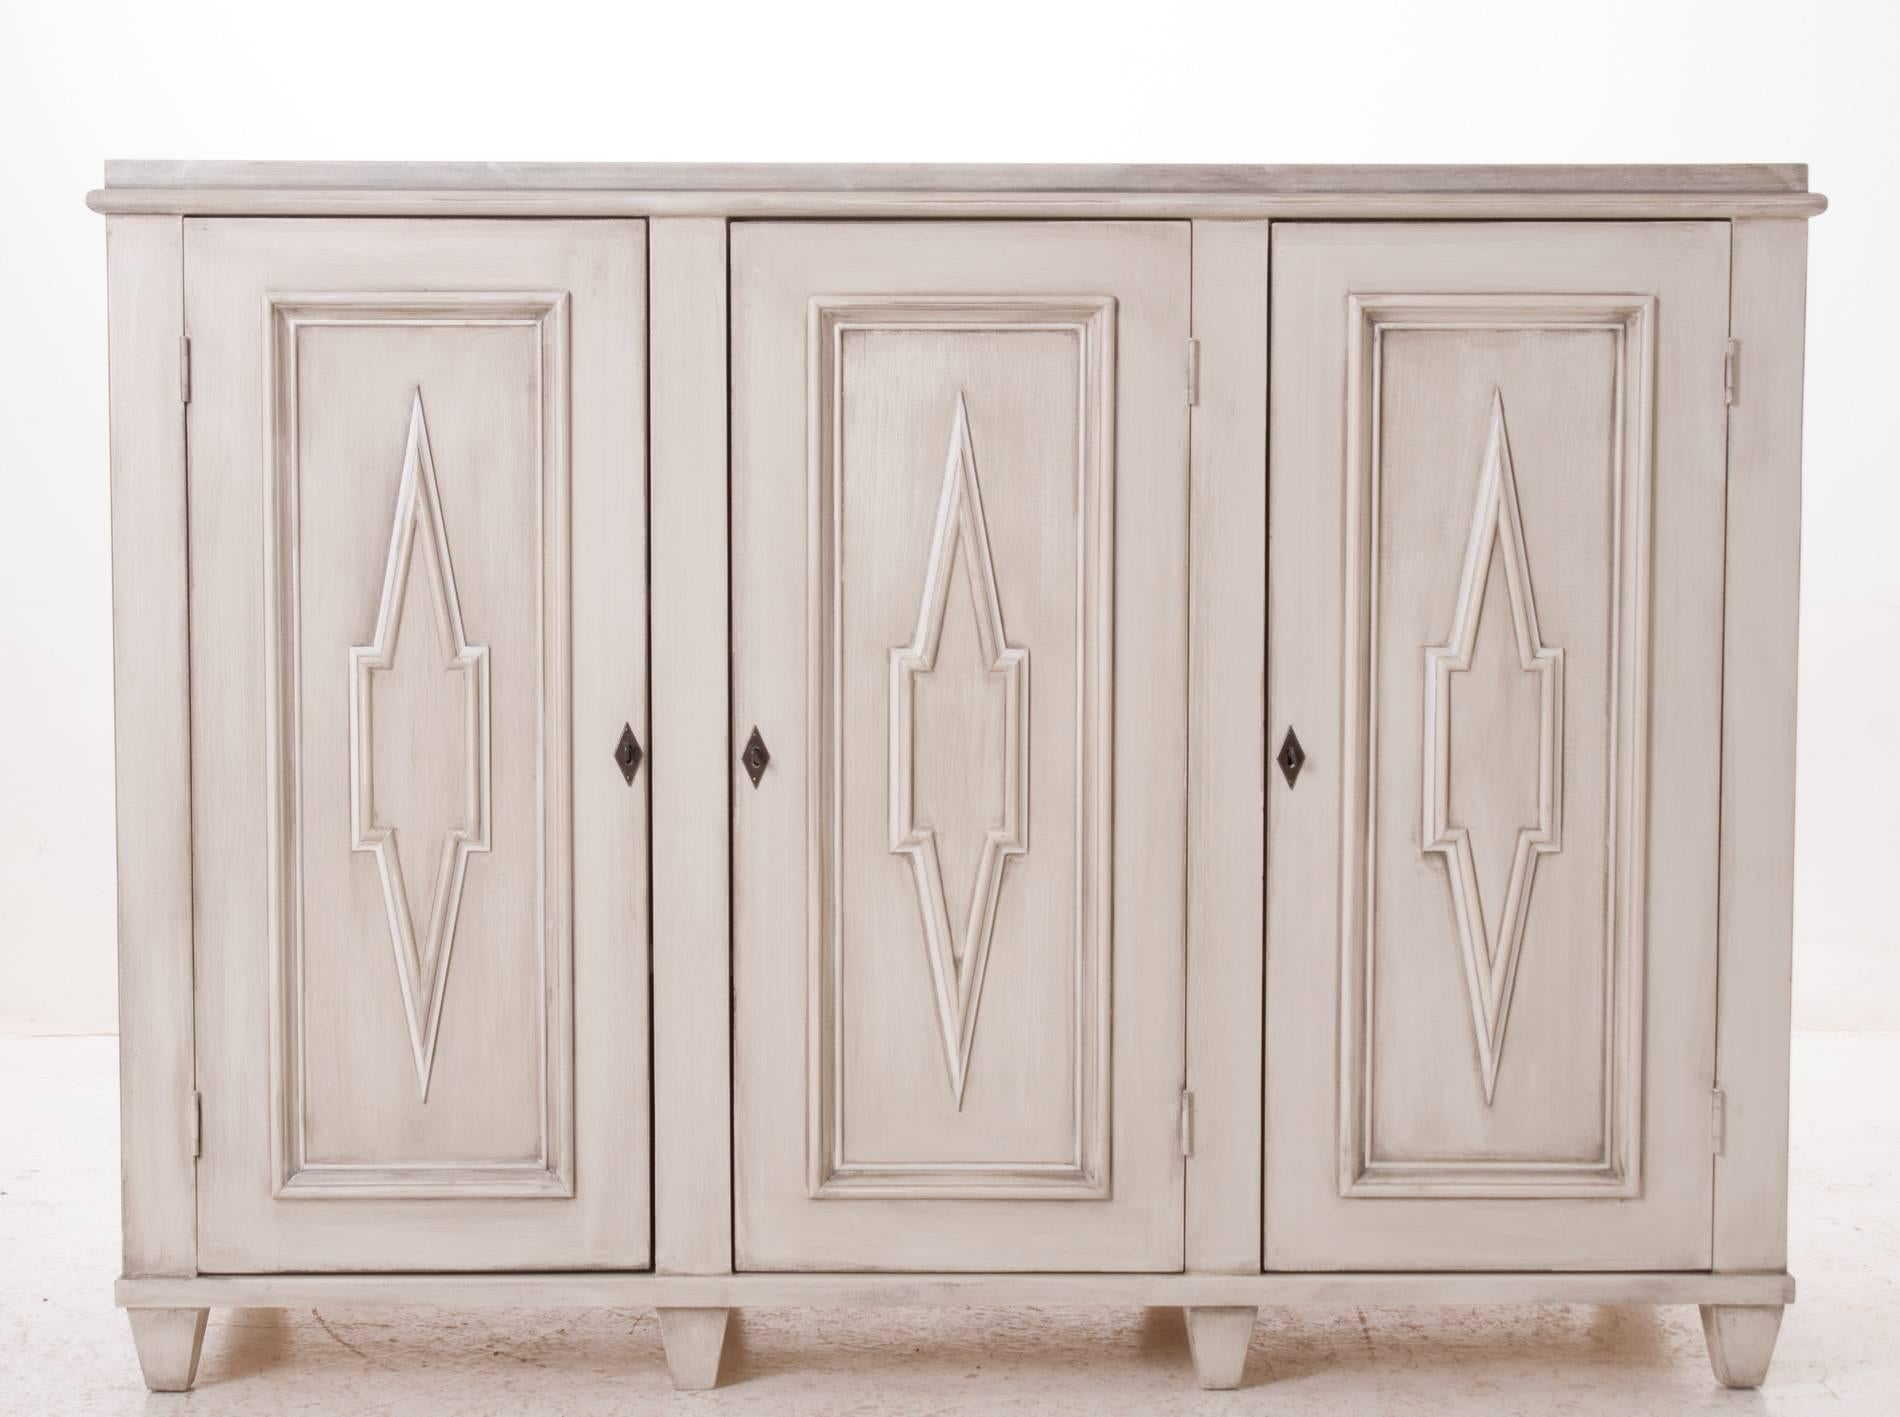 A fabulous example of a Swedish Gustavian buffet sideboard. This buffet has an impressive faux white marble top with a cream and gray wash for the base. Handcrafted paneling and designs give this buffet the look and the depth you will need for your